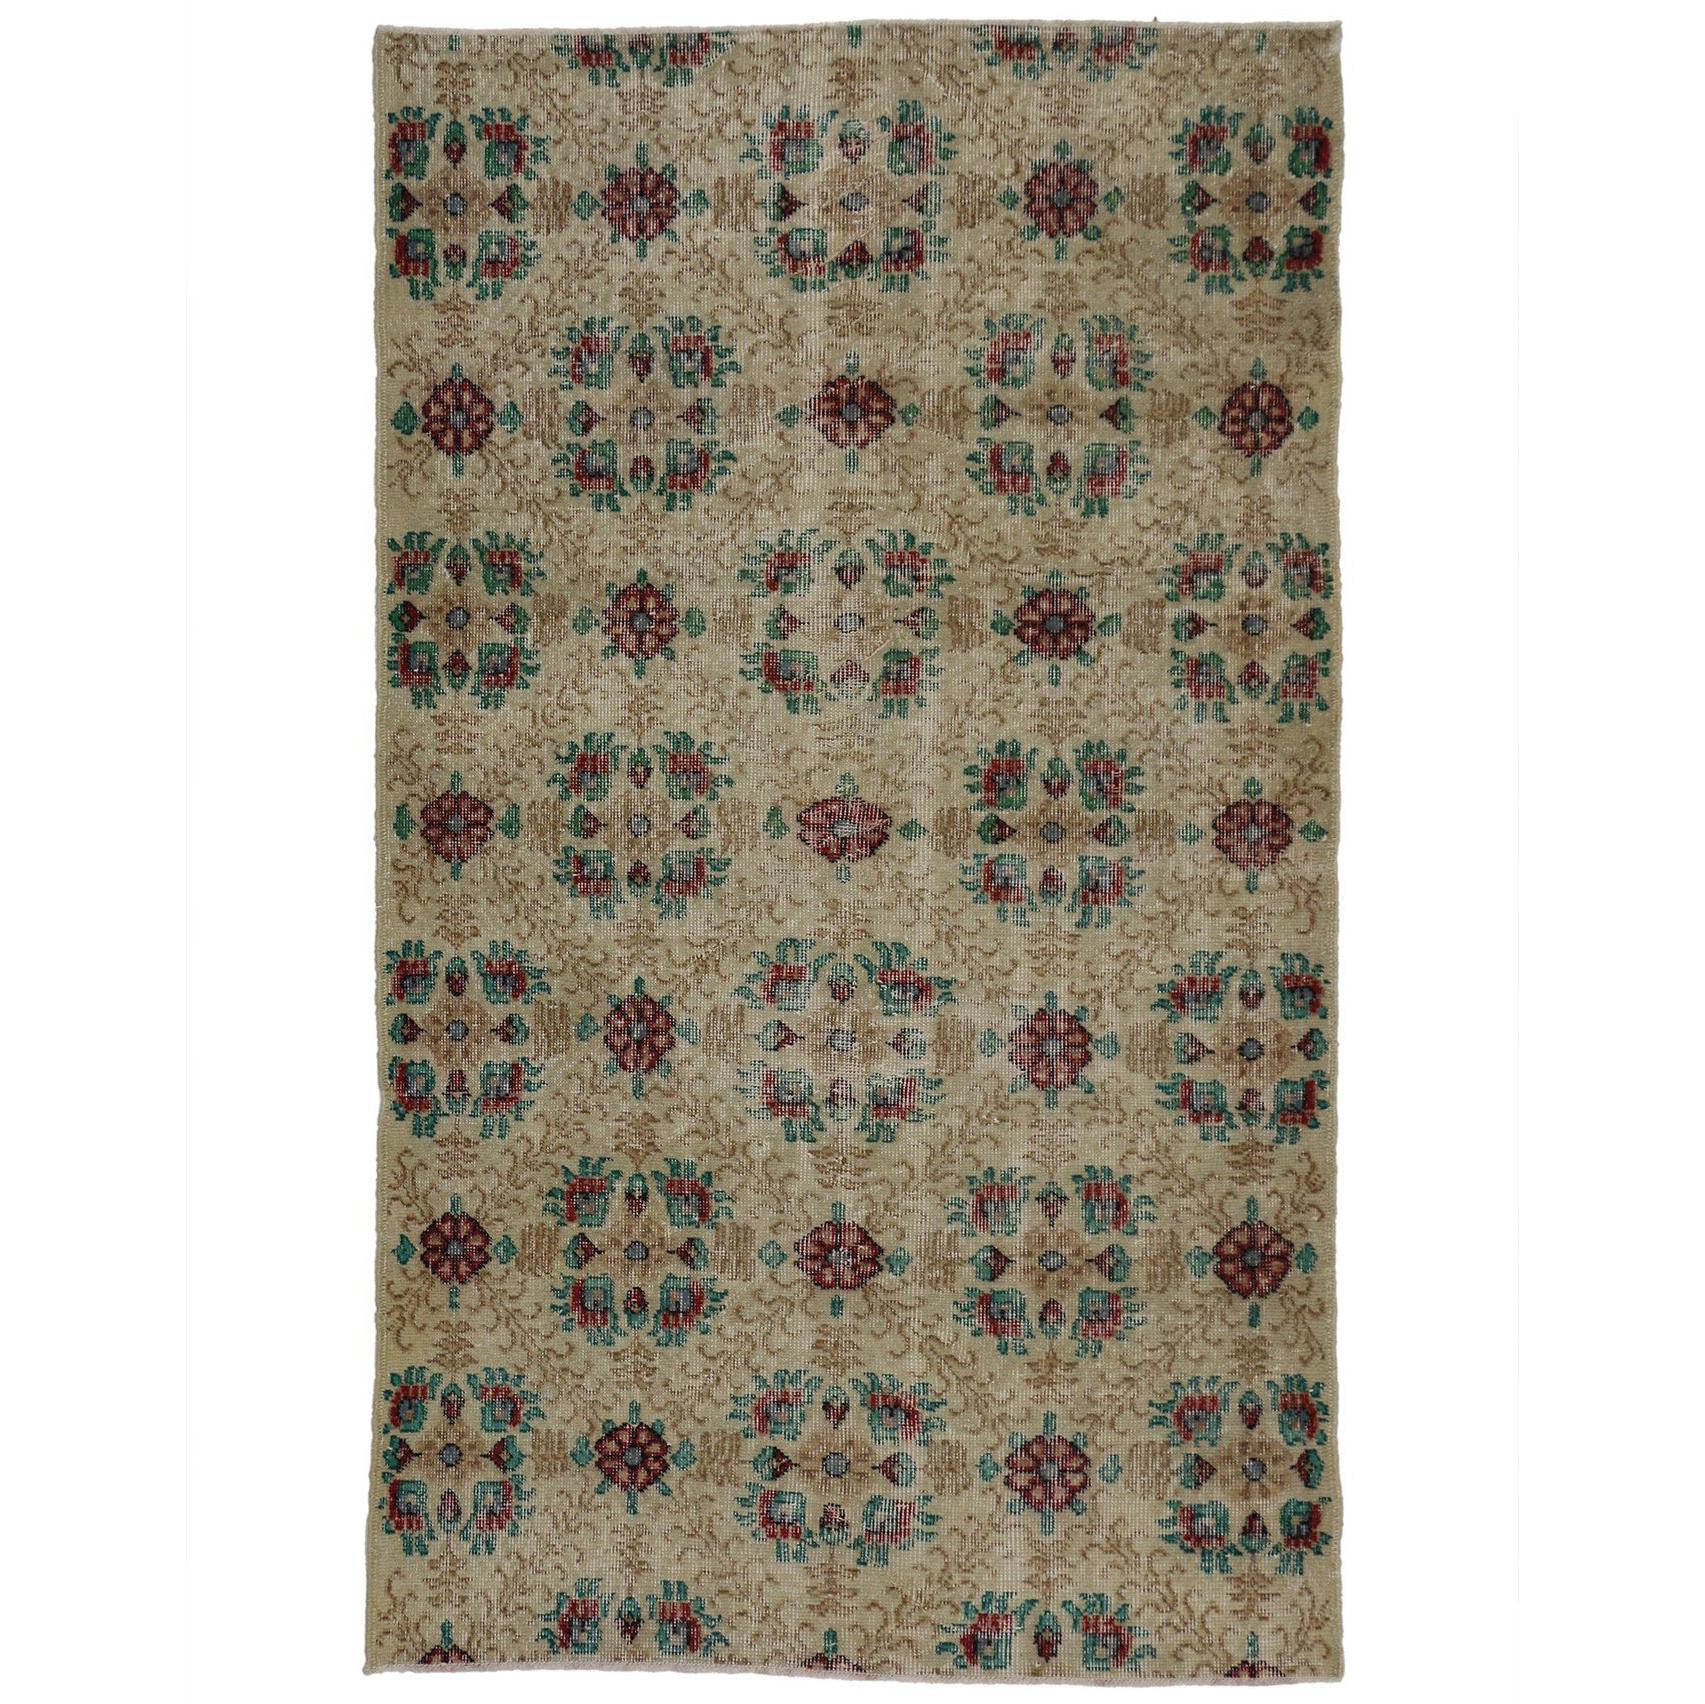 Distressed Vintage Turkish Sivas Rug with Shabby Chic Farmhouse Style